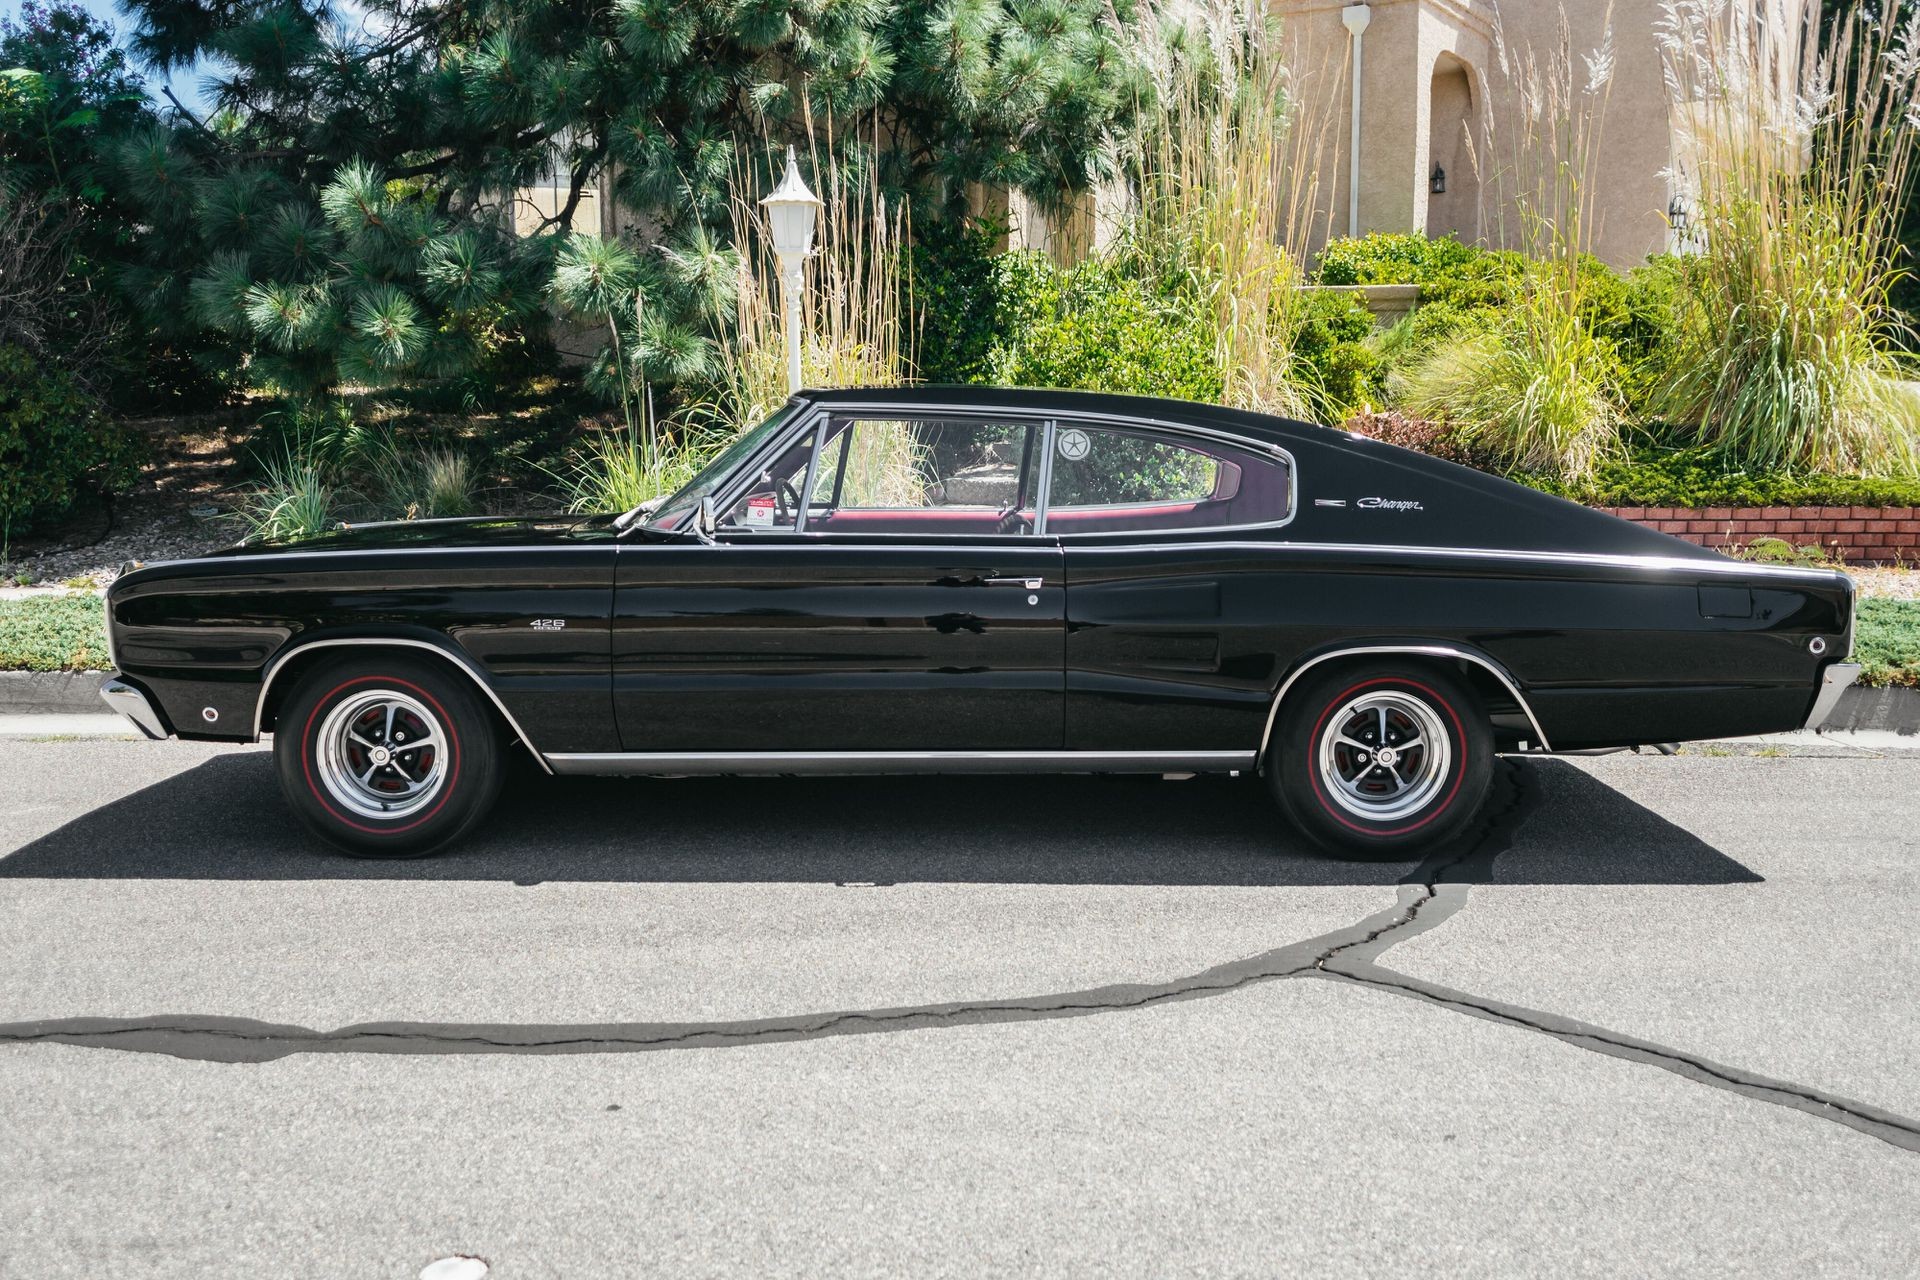 One-Owner, Original-Engine 1966 Dodge Charger Hemi 426 is Ready for its Next Adventure